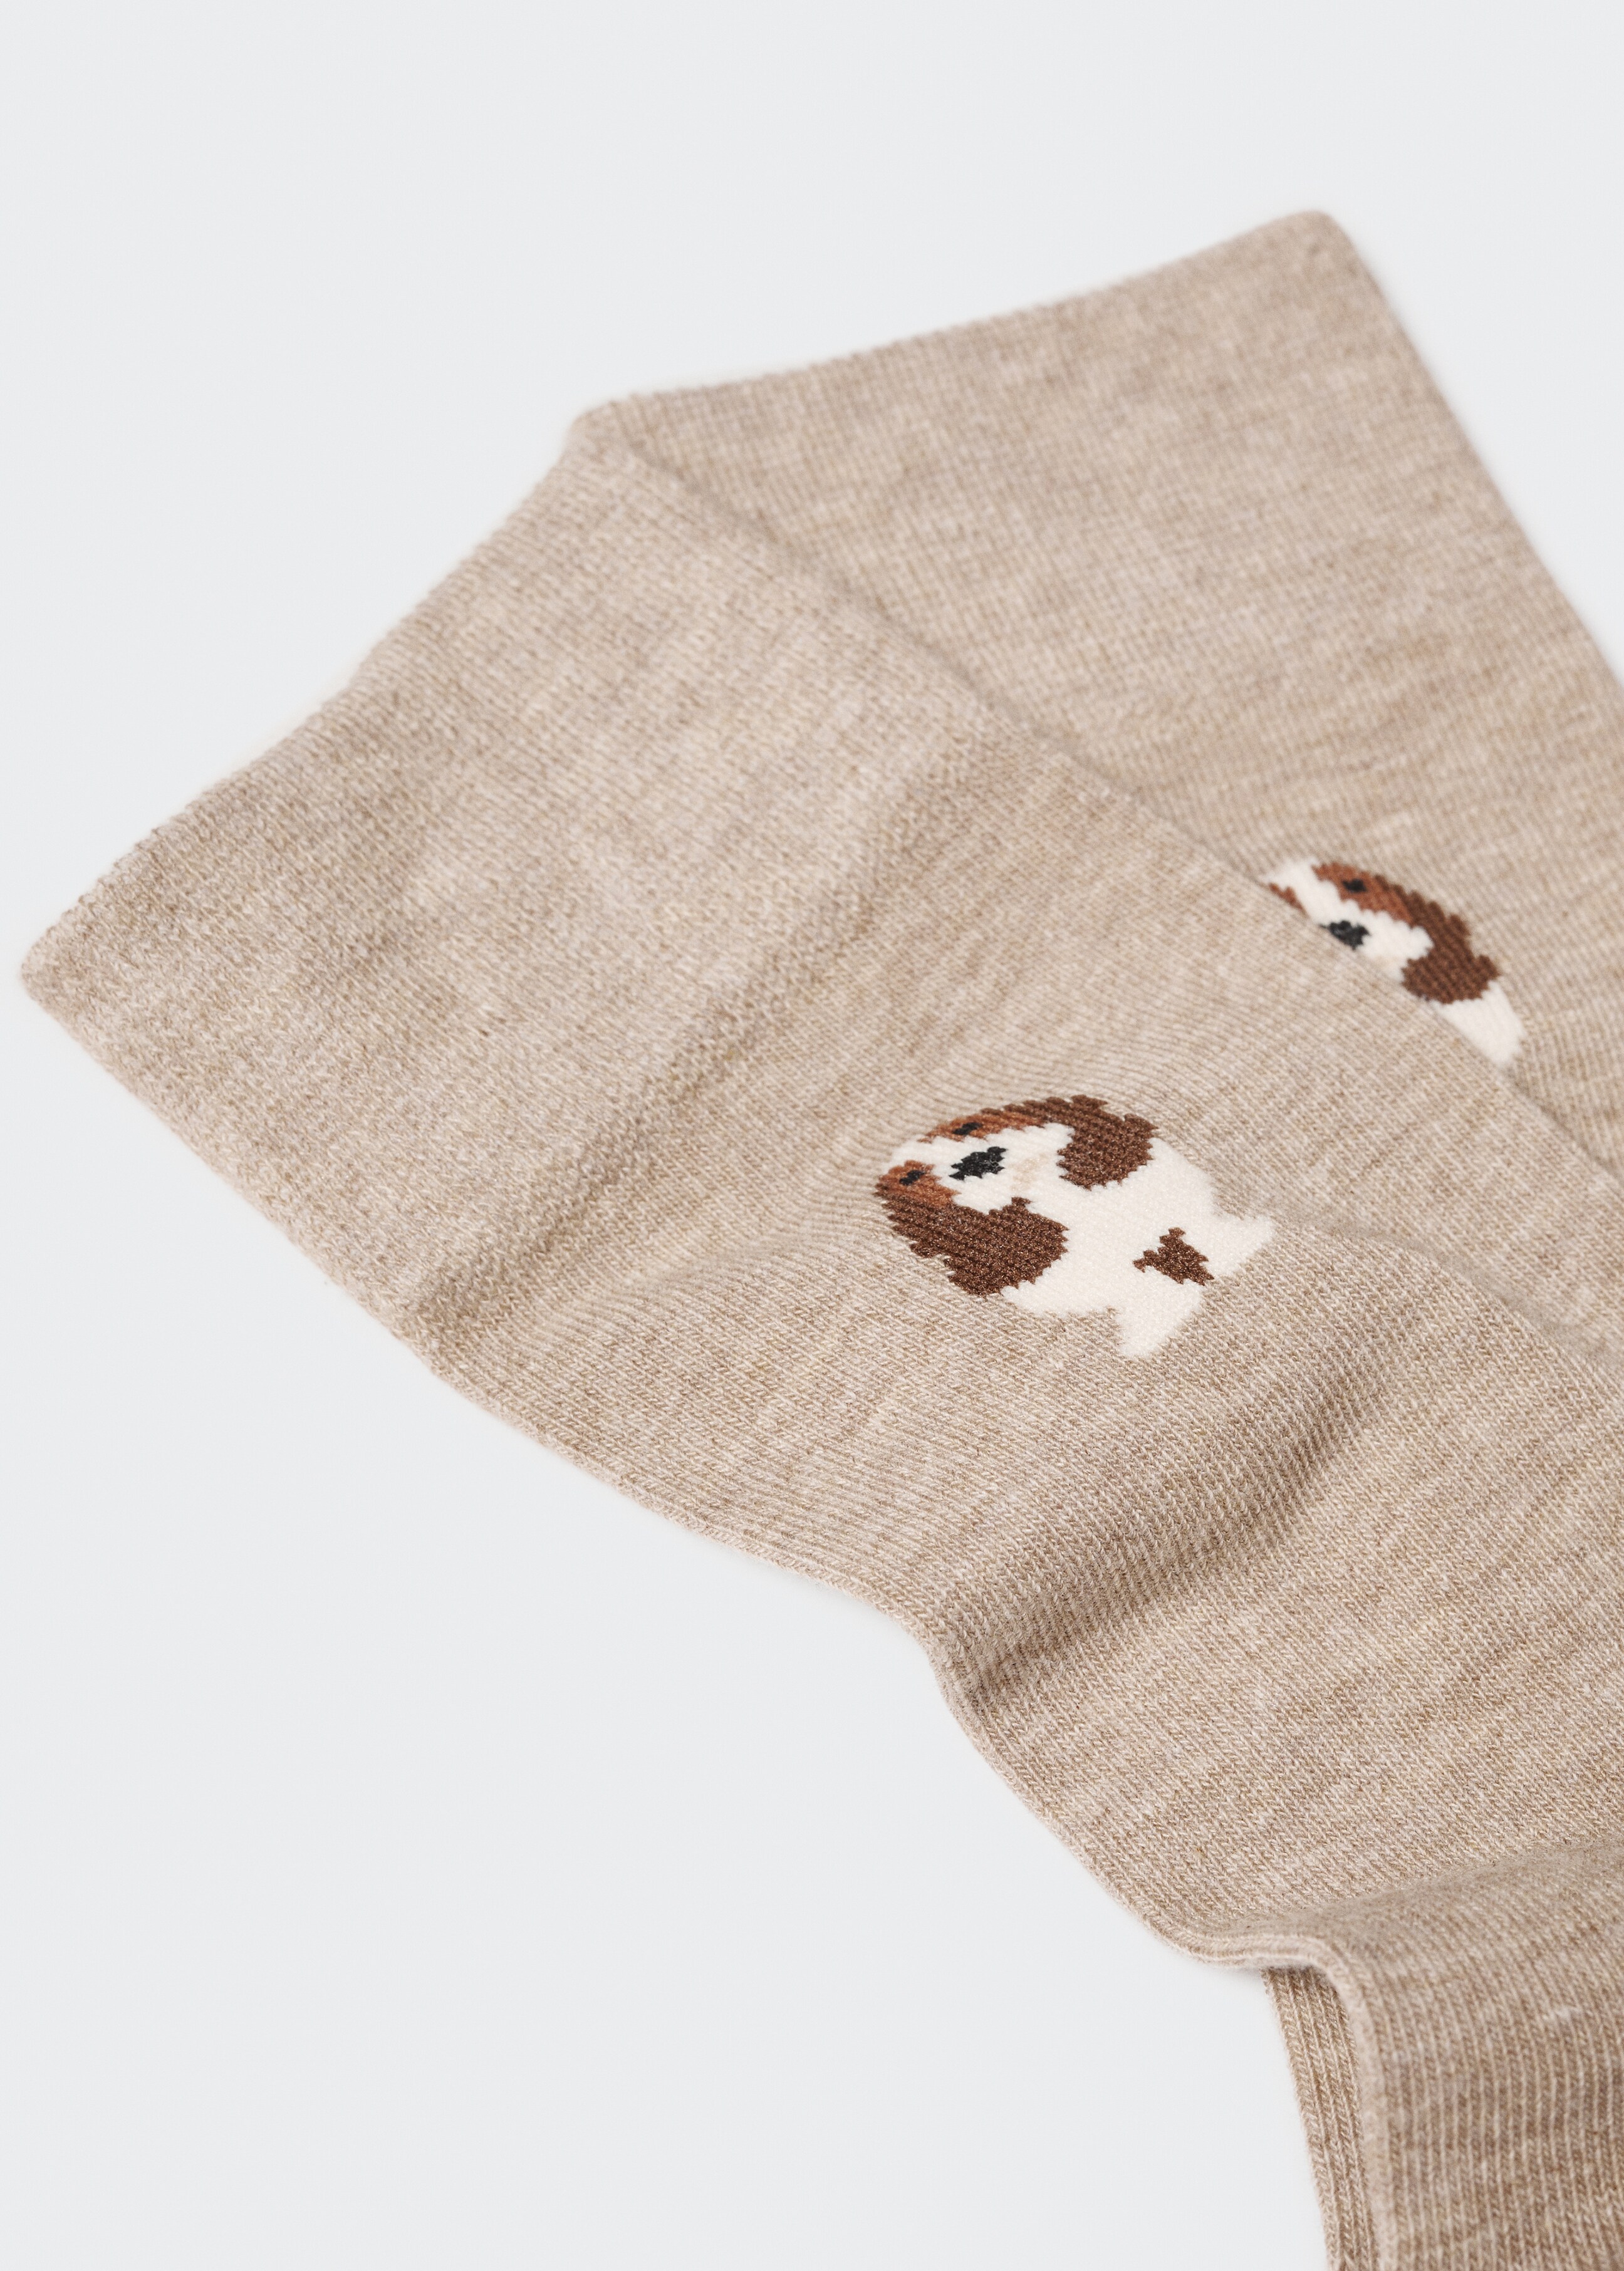 Animal print cotton socks - Details of the article 8